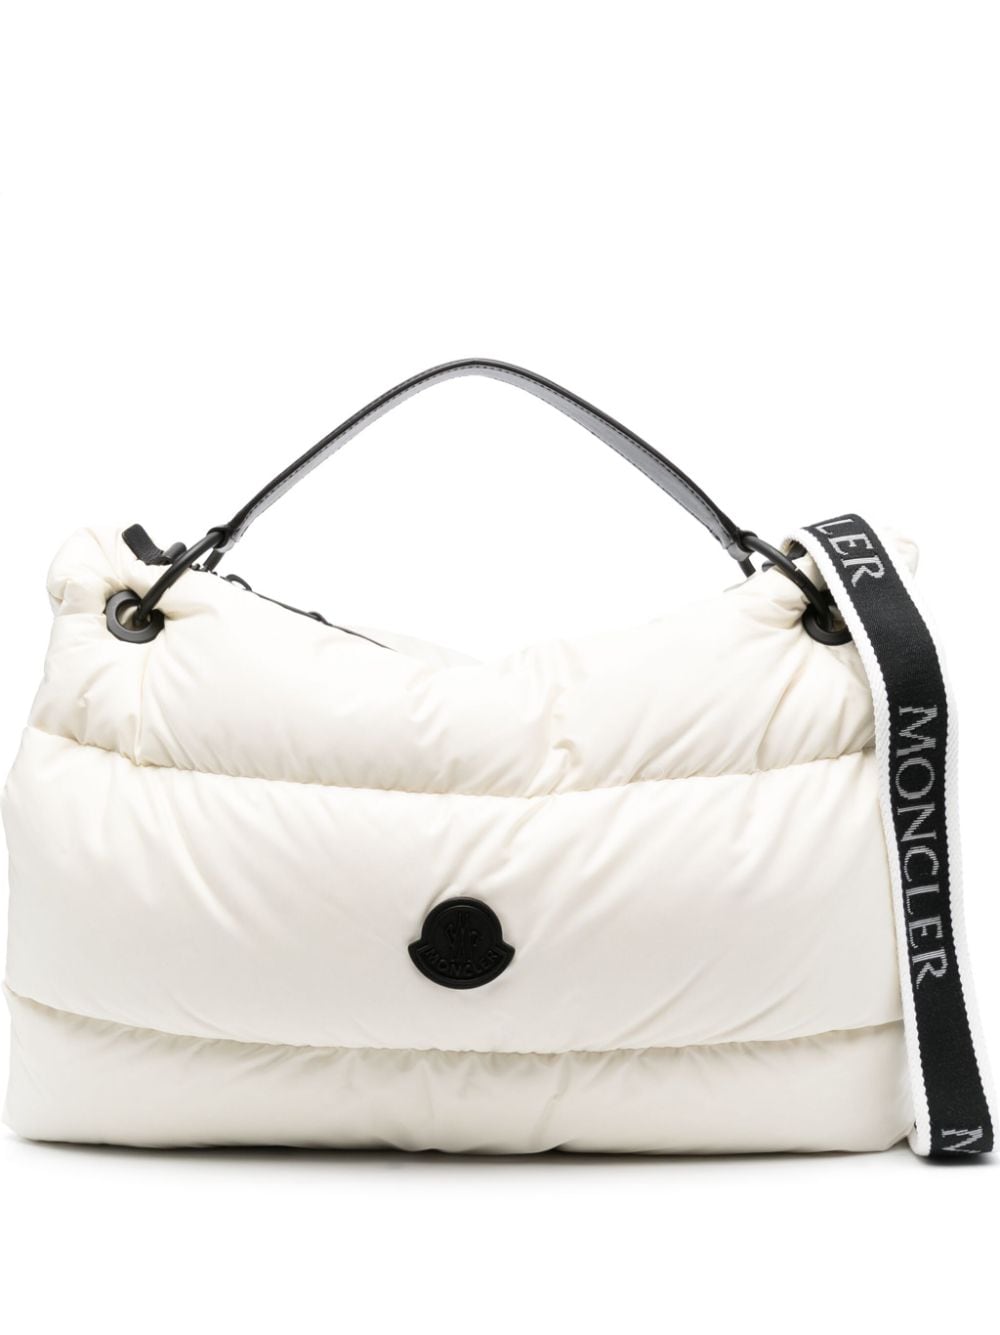 Moncler Legere quilted tote bag - White von Moncler